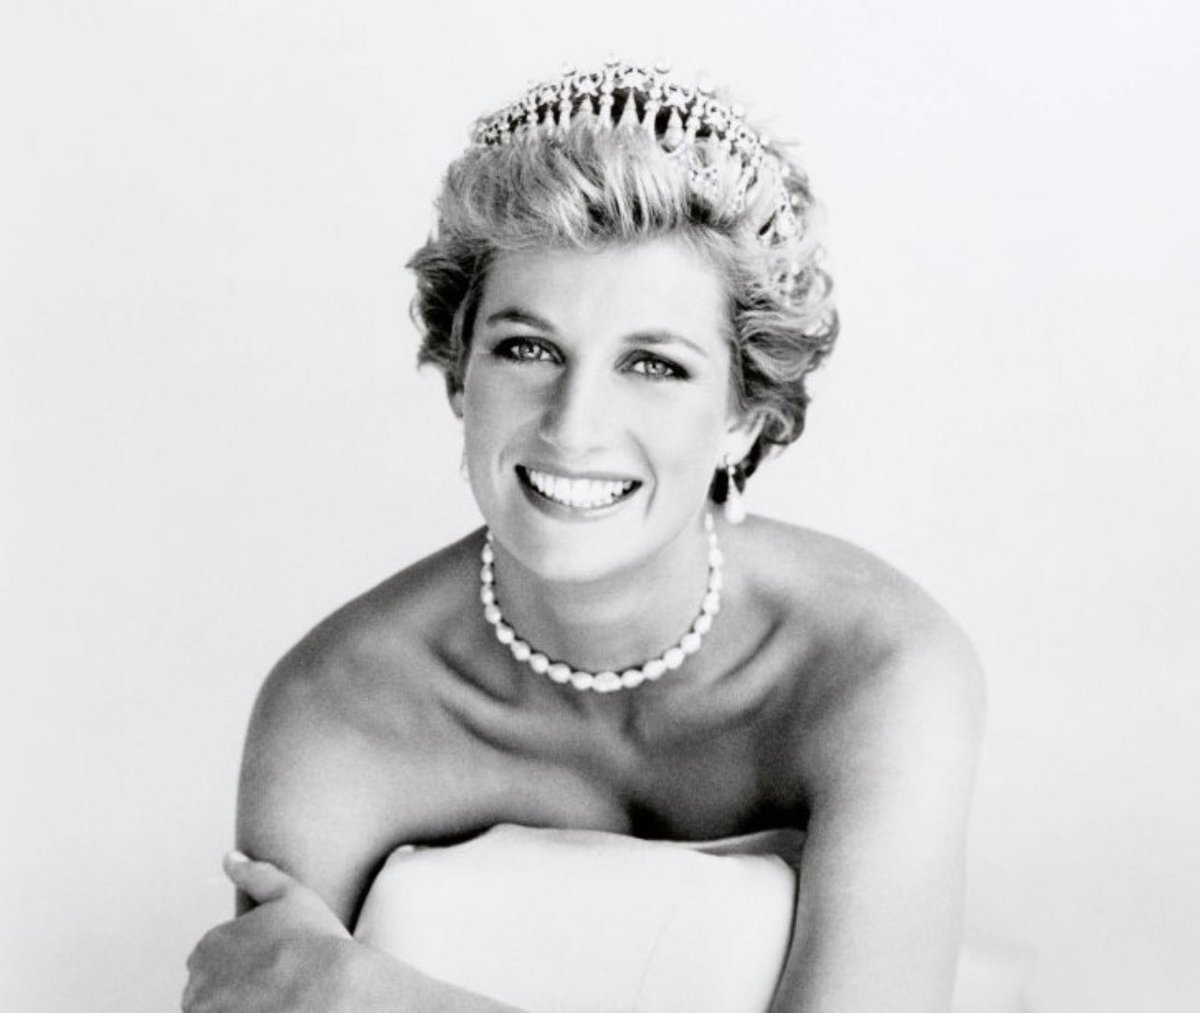 Unforgettable ❤️
#ladydiana #diana #dianaspencer #queen